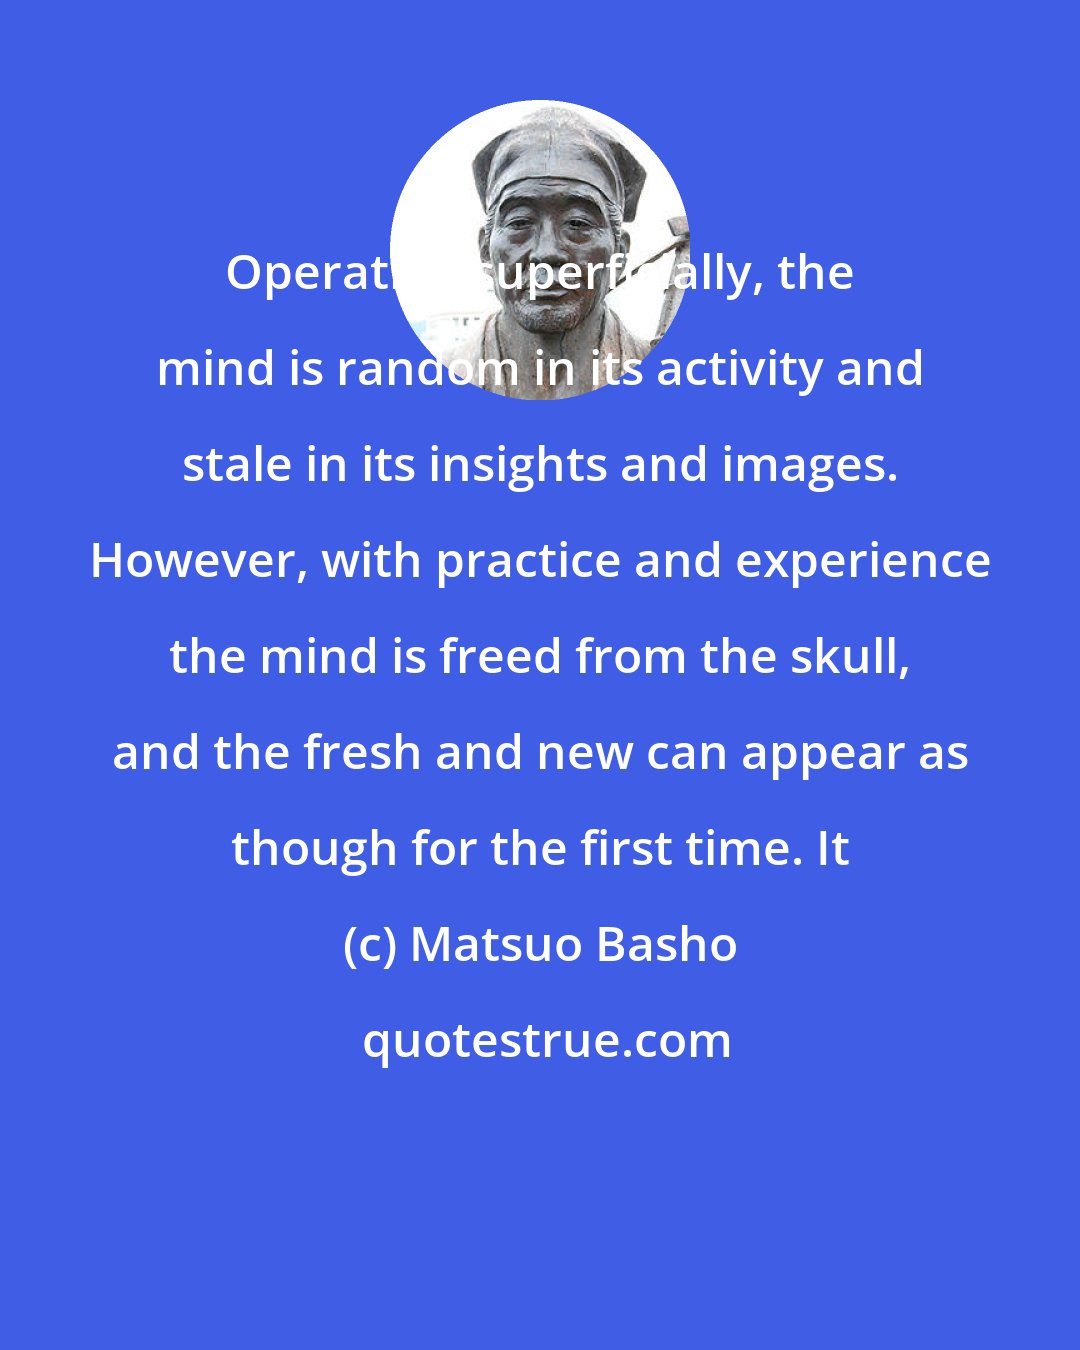 Matsuo Basho: Operating superficially, the mind is random in its activity and stale in its insights and images. However, with practice and experience the mind is freed from the skull, and the fresh and new can appear as though for the first time. It